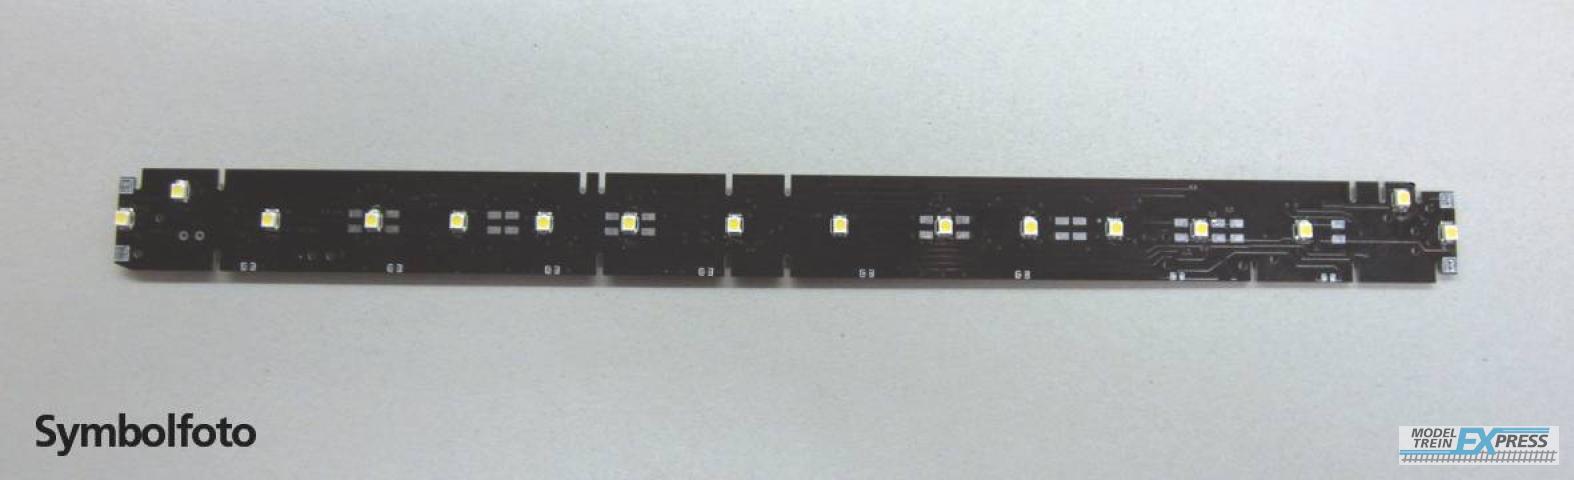 Piko 56310 LED-Schlussbeleuchtung IC modern